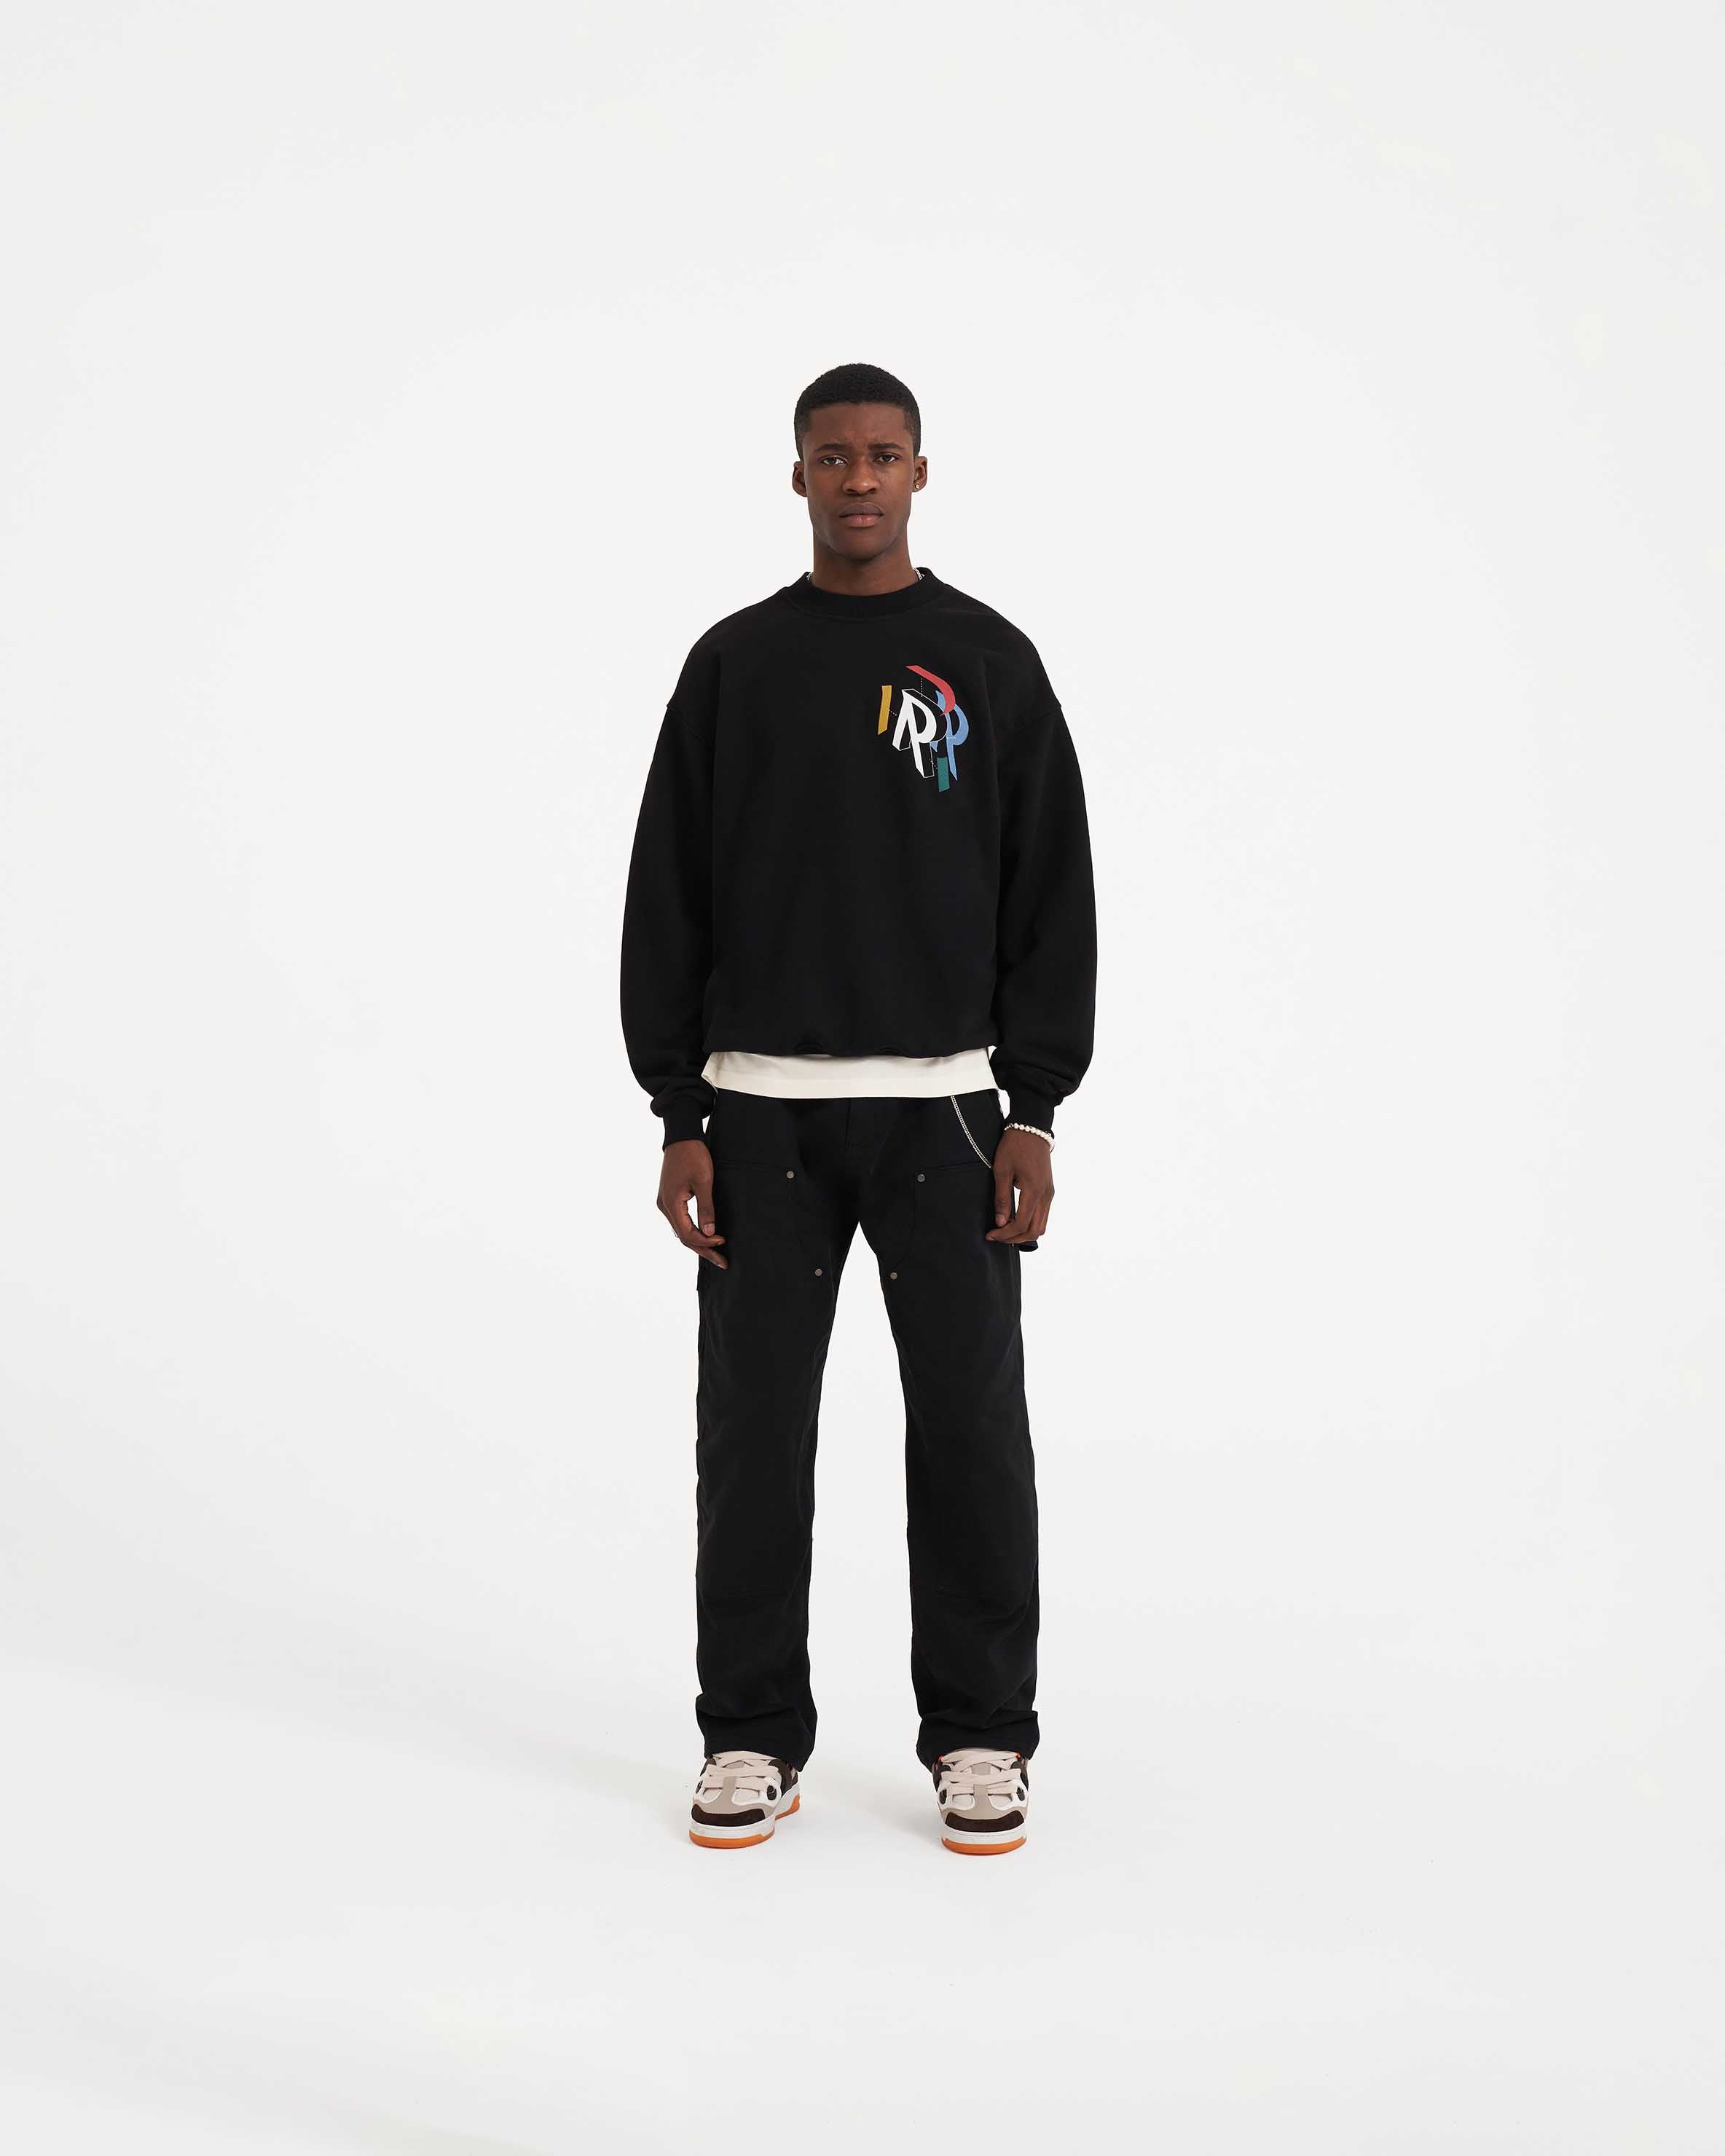 Initial Assembly Sweater - Black